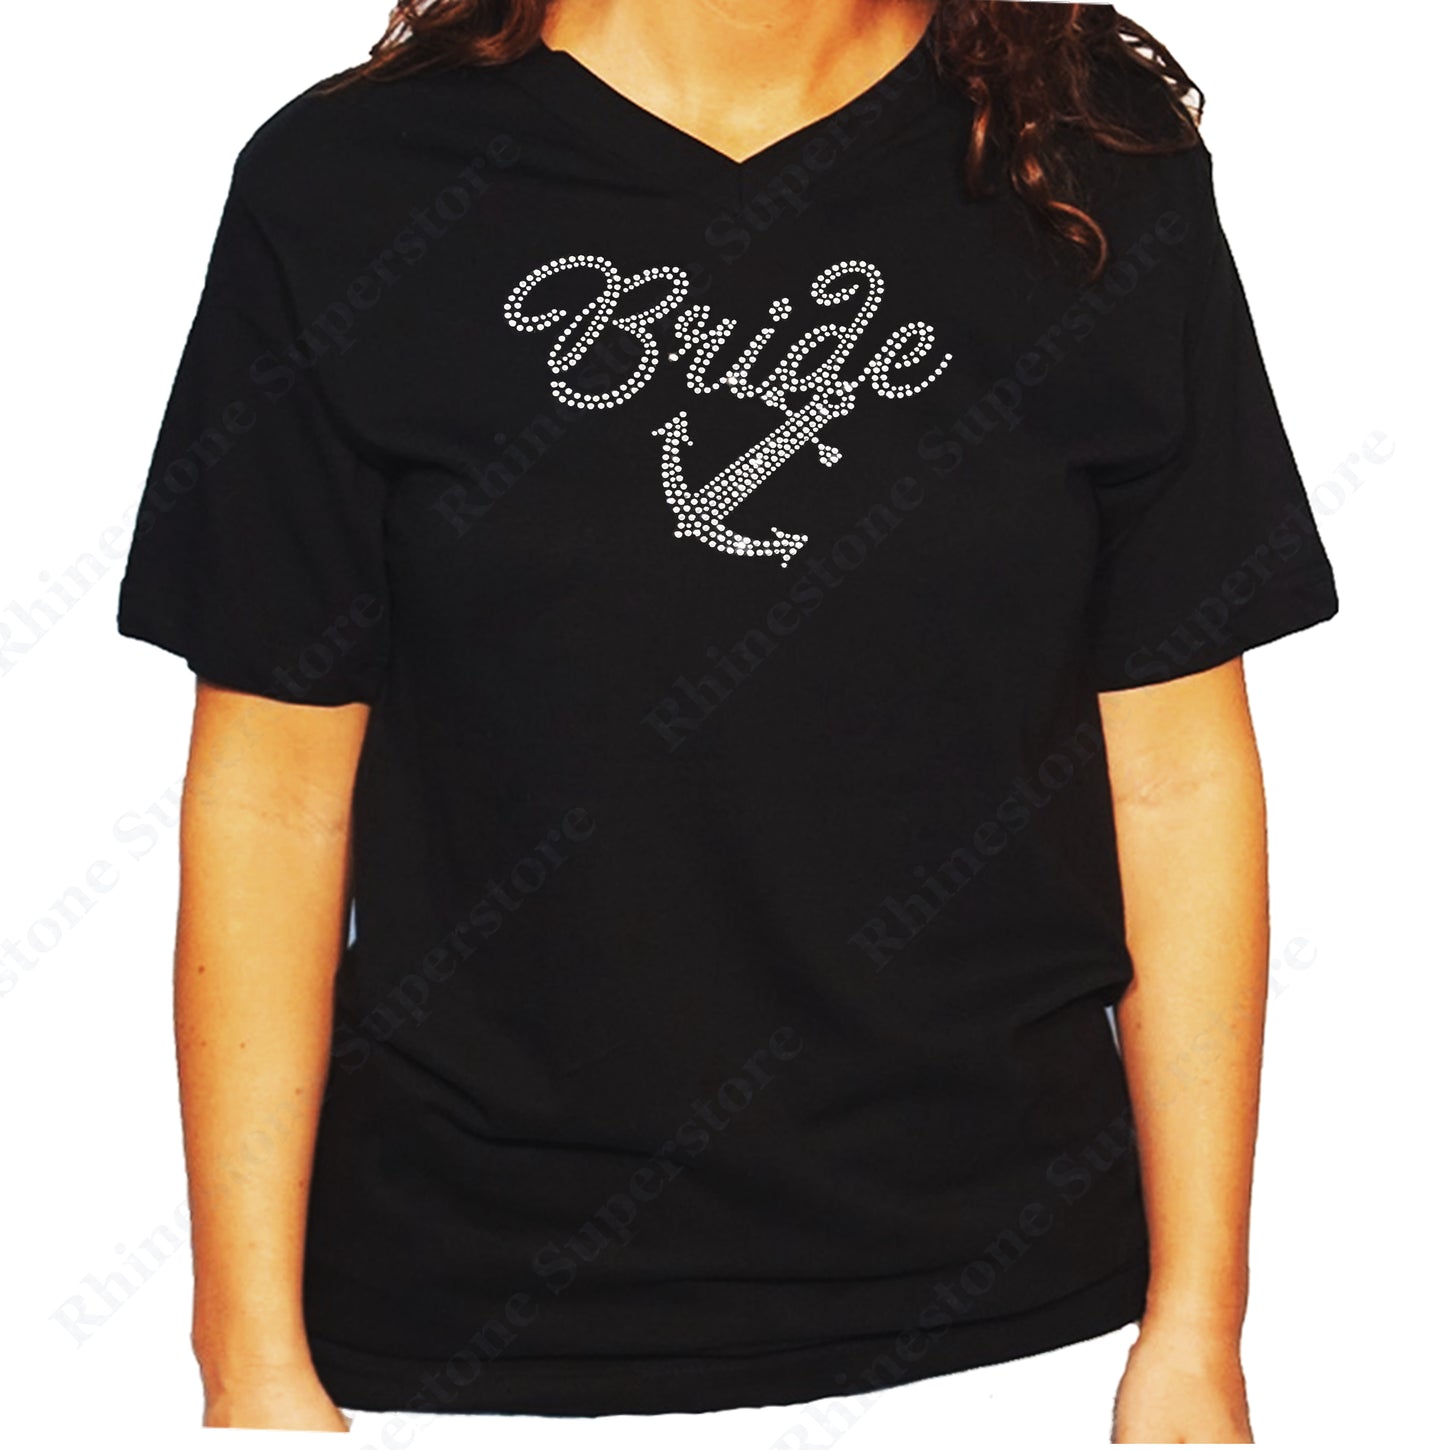 Women's / Unisex T-Shirt with Bride with Anchor in Rhinestones